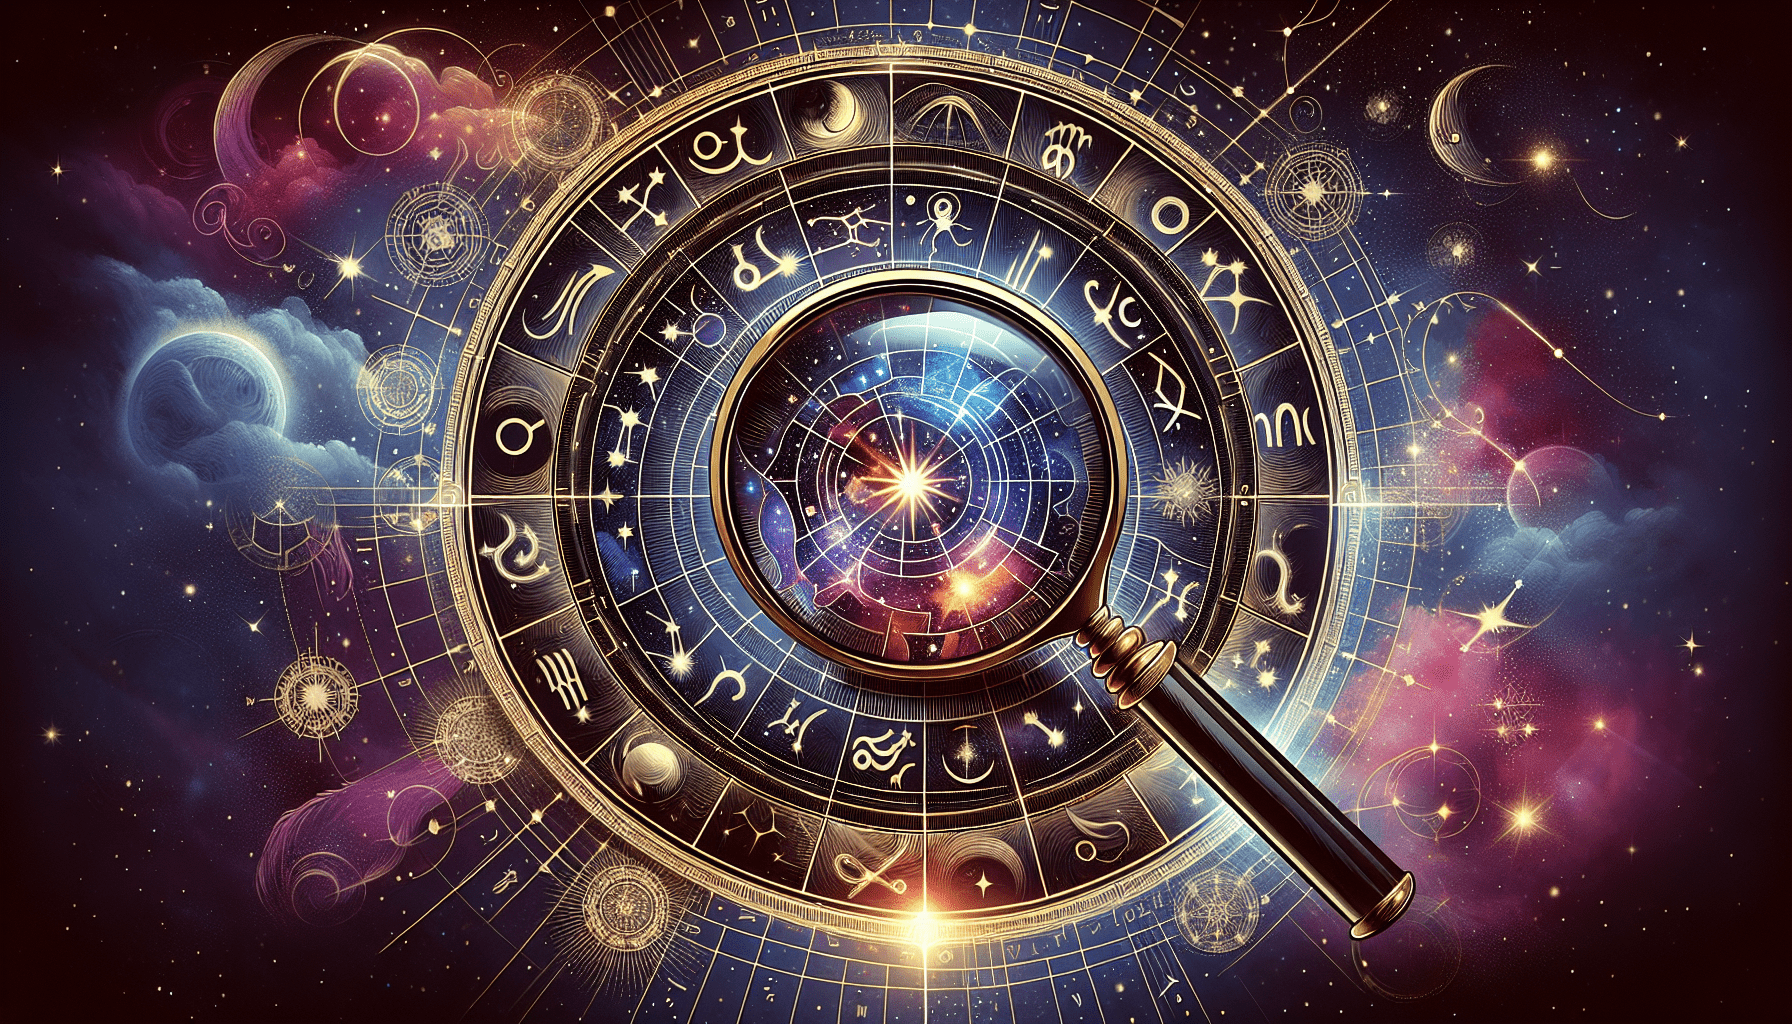 Why Is Astrologer Needed?